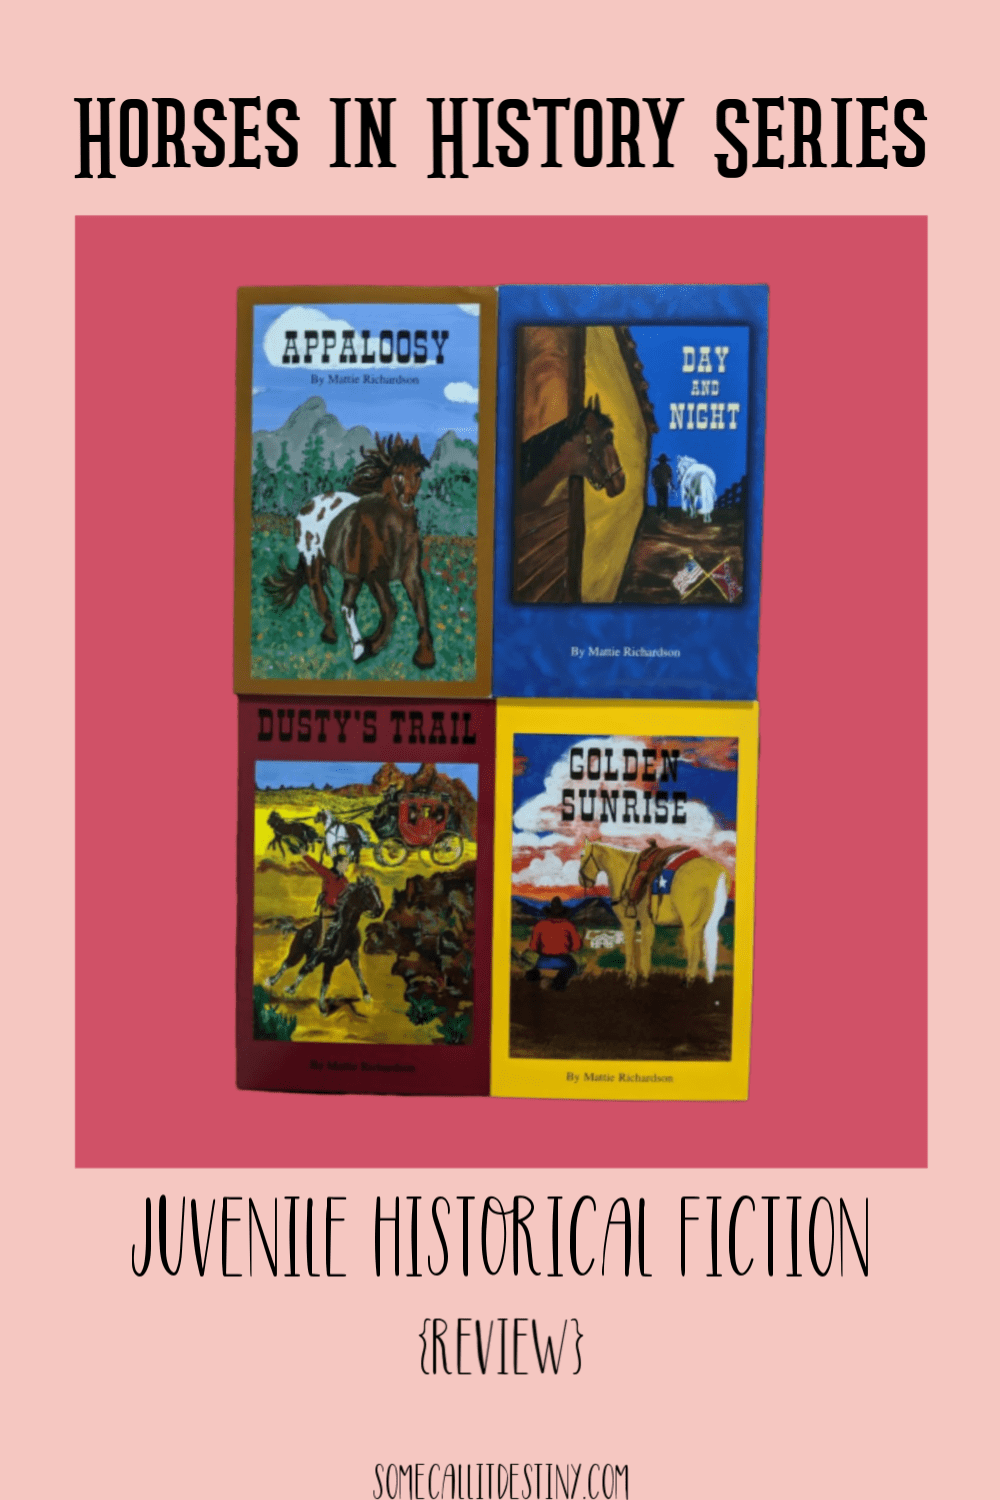 horses in history series by Mattie Richardson